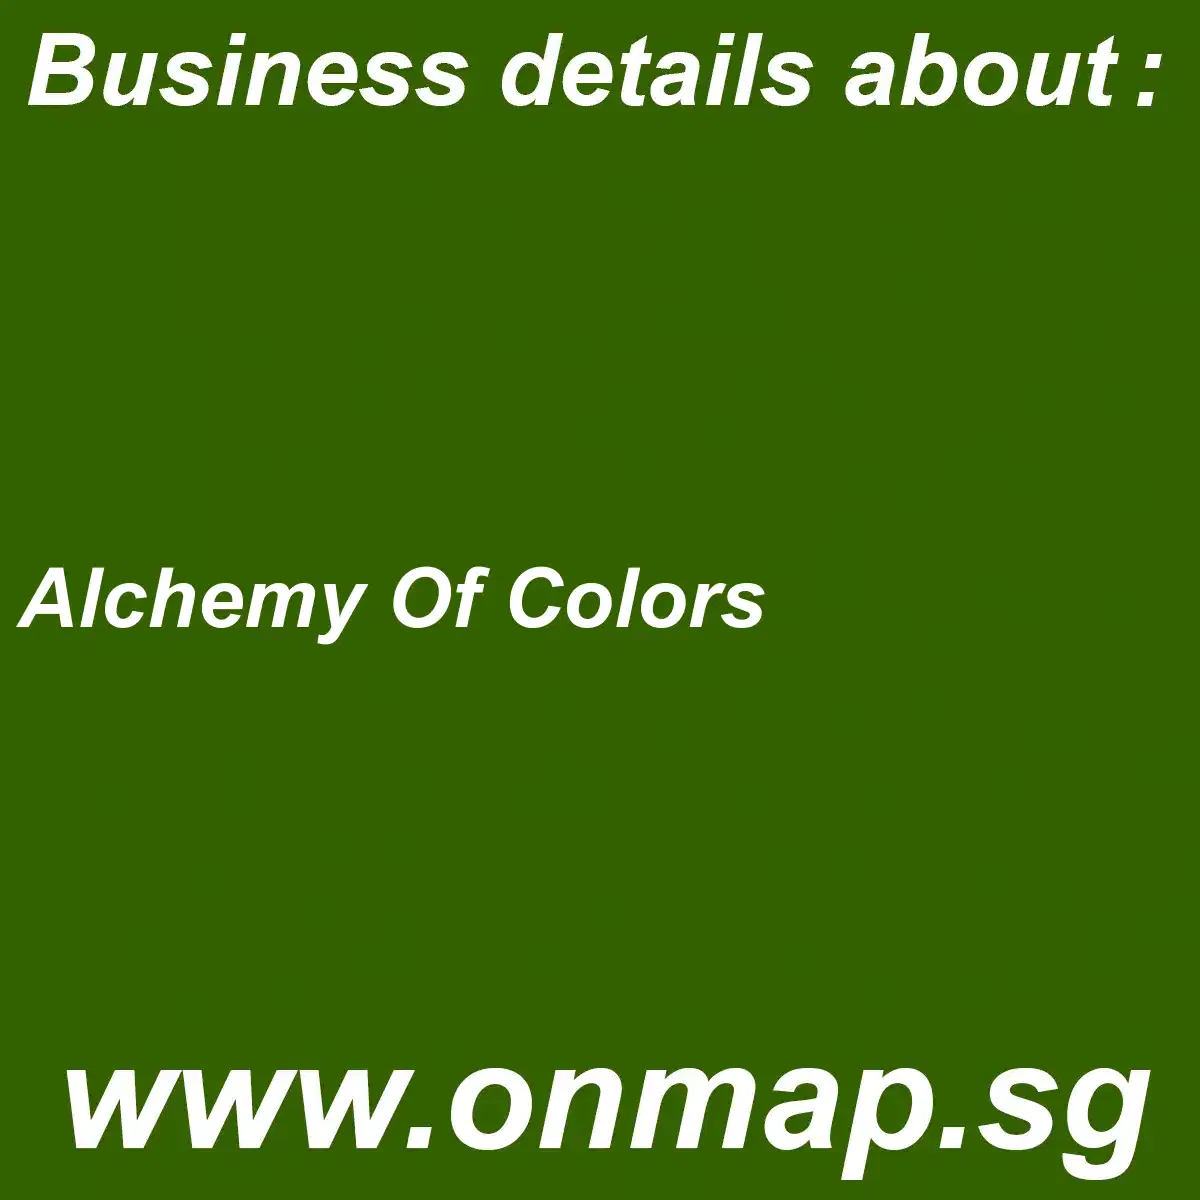 Alchemy Of Colors - Details, Locations, Reviews